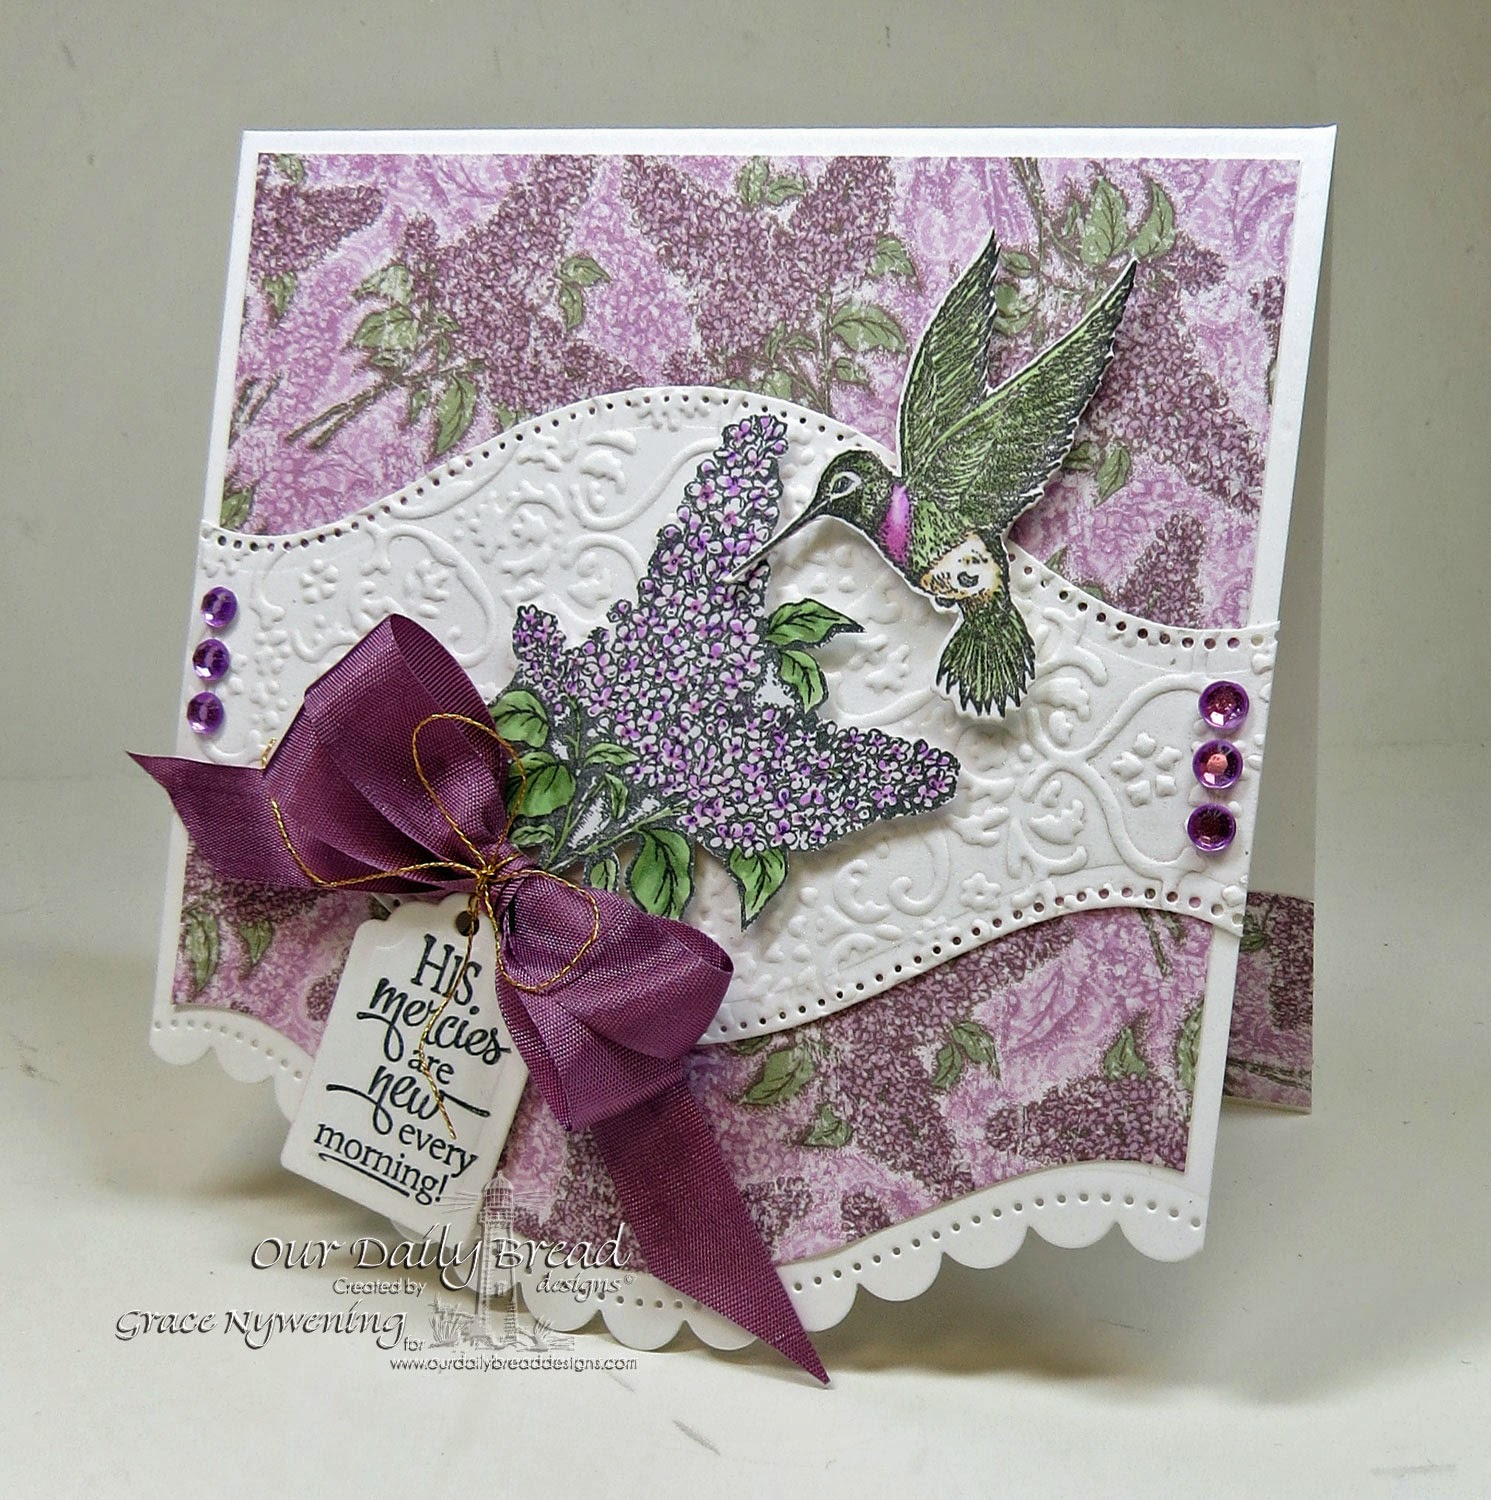 Our Daily Bread designs stamps Sentiment Collectiion 2, Lilac, ODBD Blooming Garden Paper Colection, ODBD Hummingbird single stamp and ODBD die, desisnged by Grace Nywening